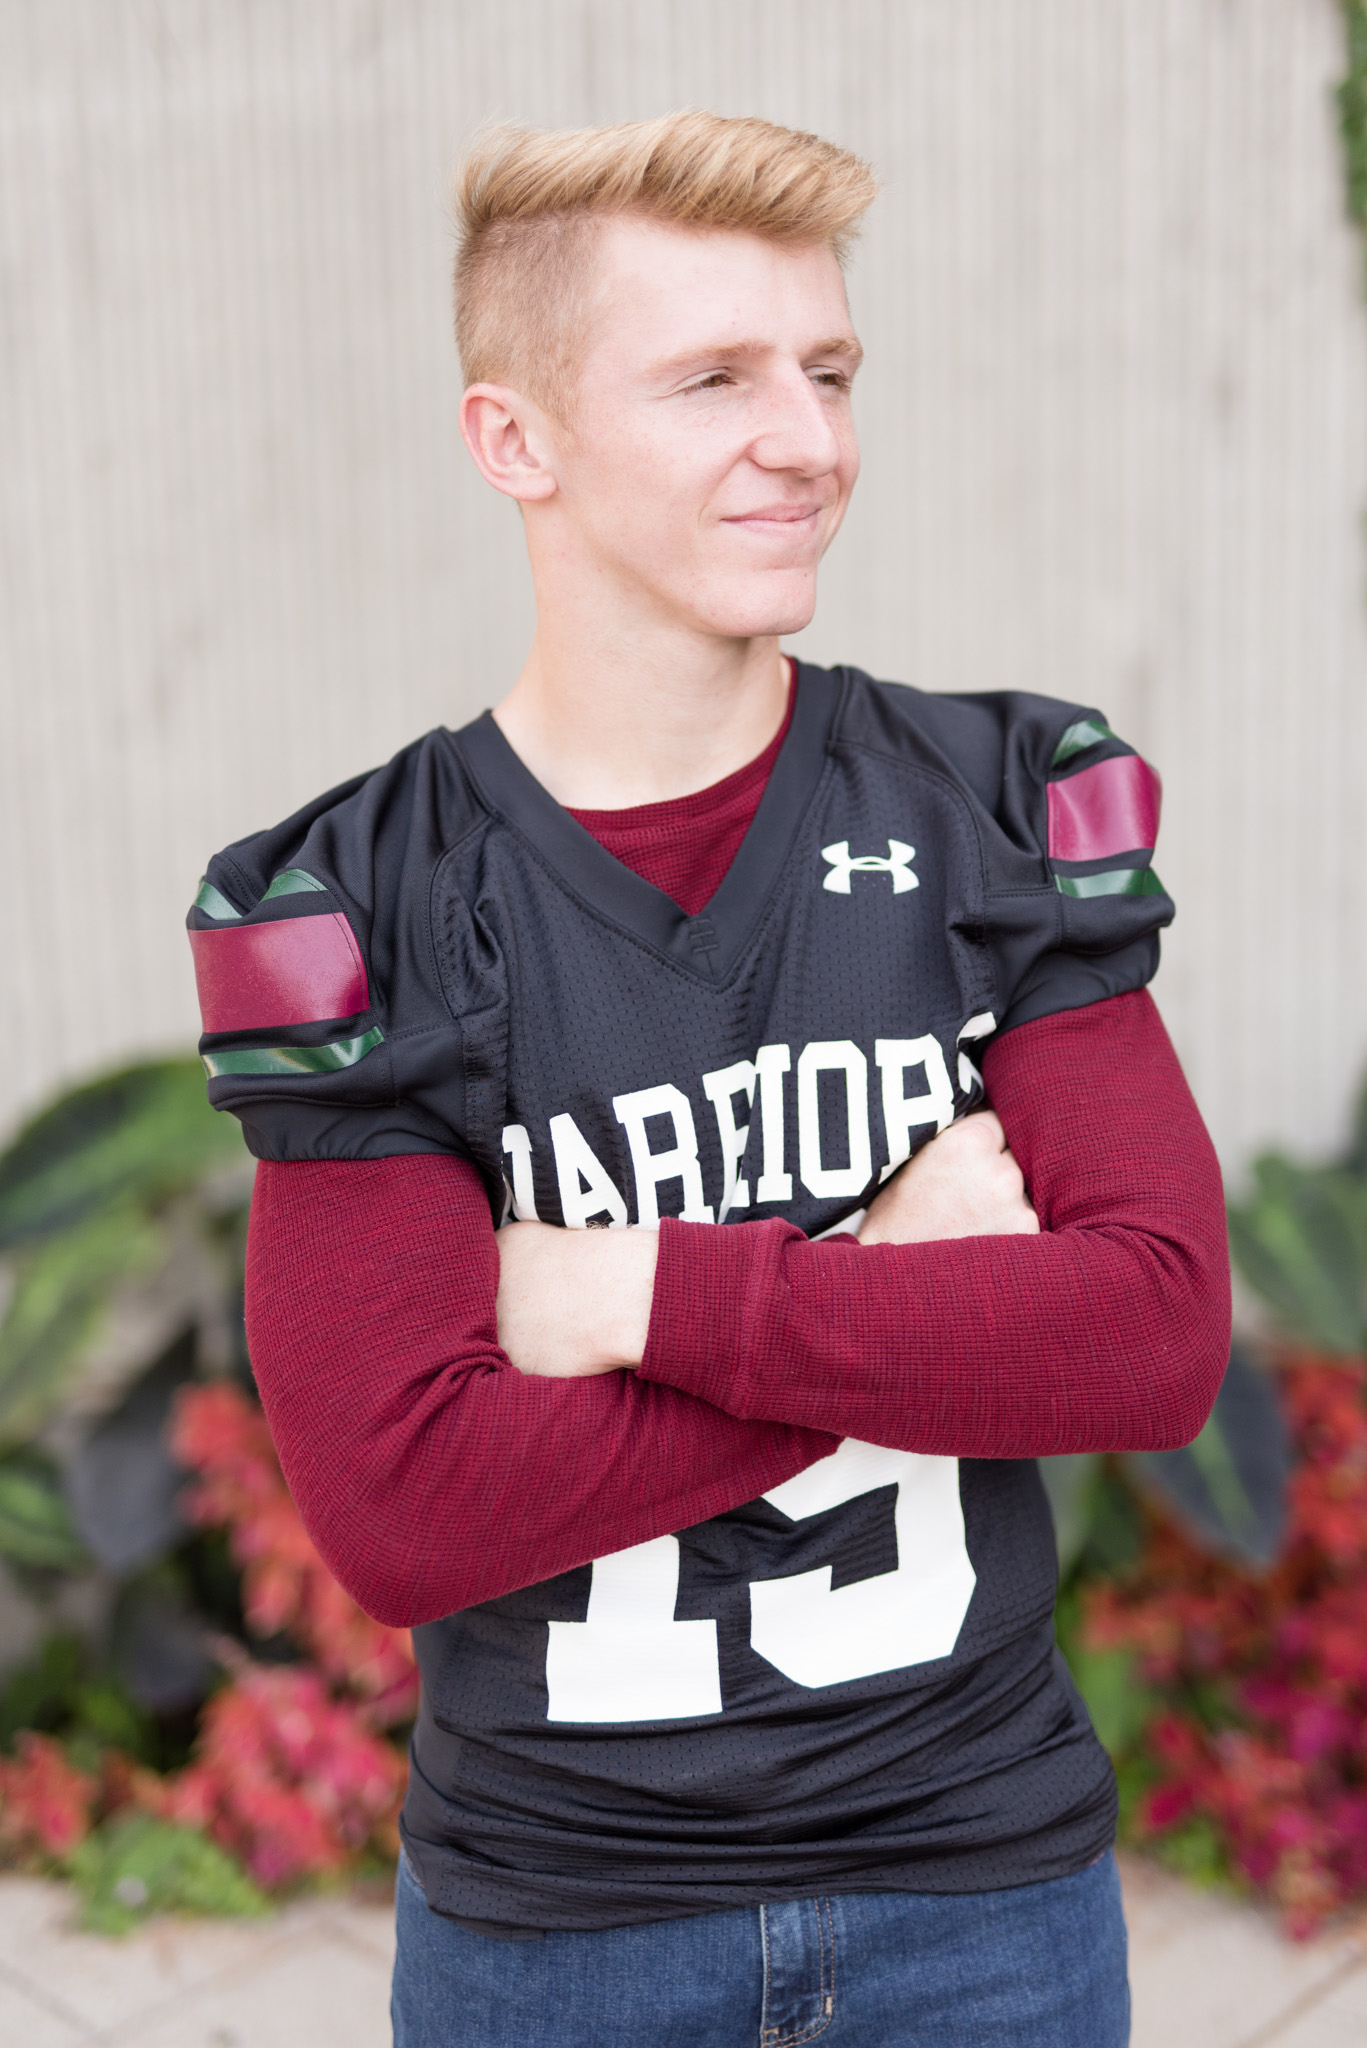 Senior guy looks off camera and crosses arms in football jersey.